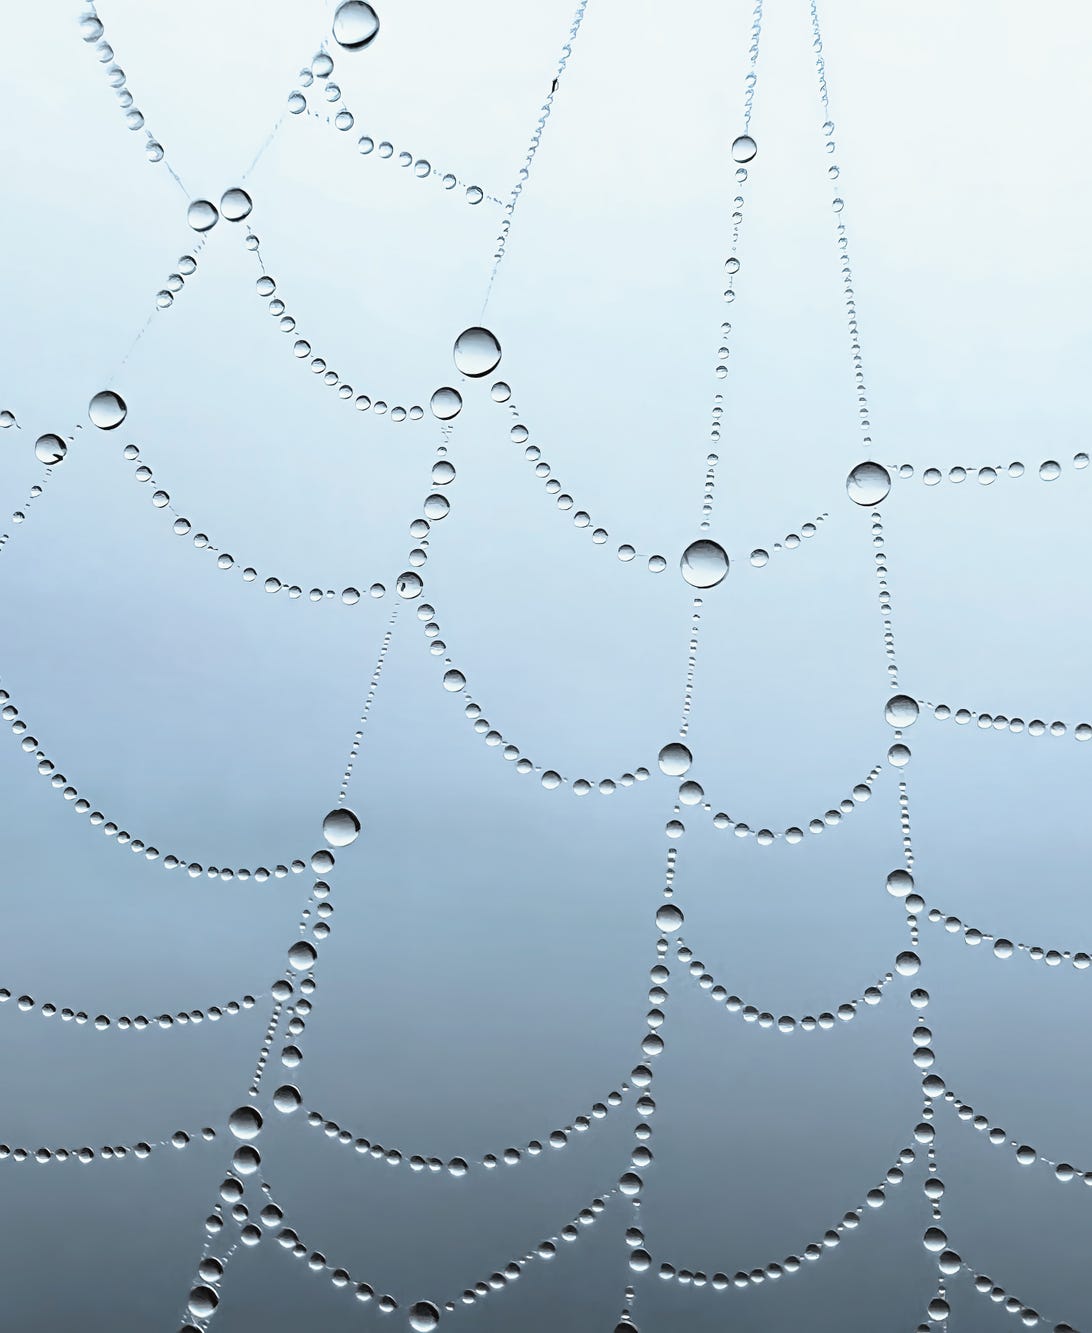 Dew drops are caught on a spider's web.